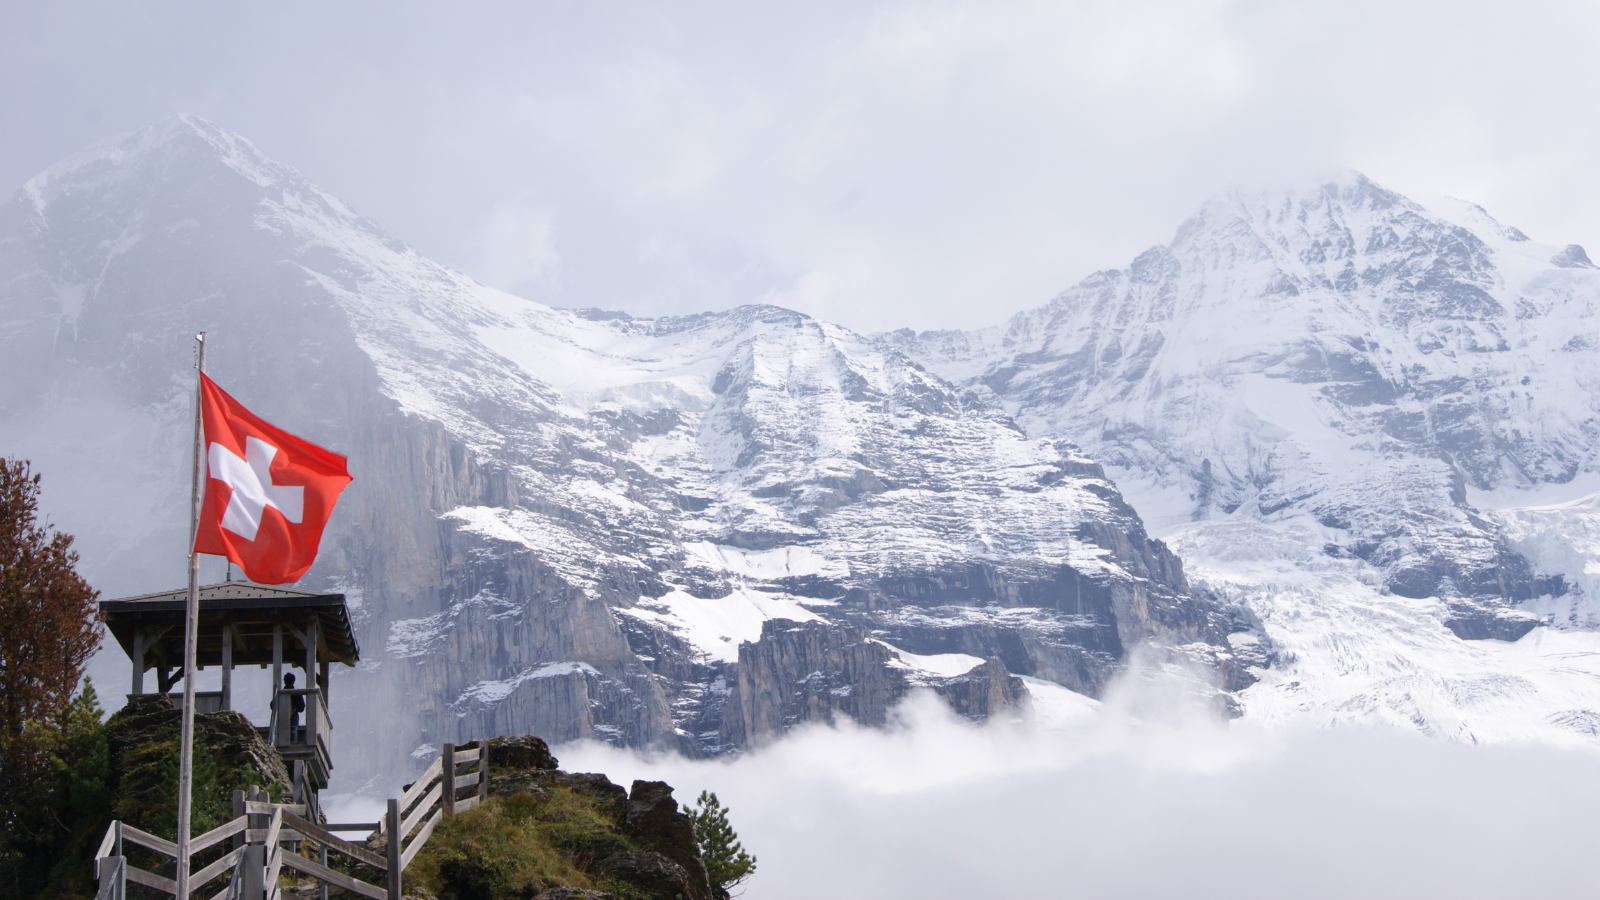 The first thing in the list of 10 best things to do in Switzerland - Explore the Swiss Alps